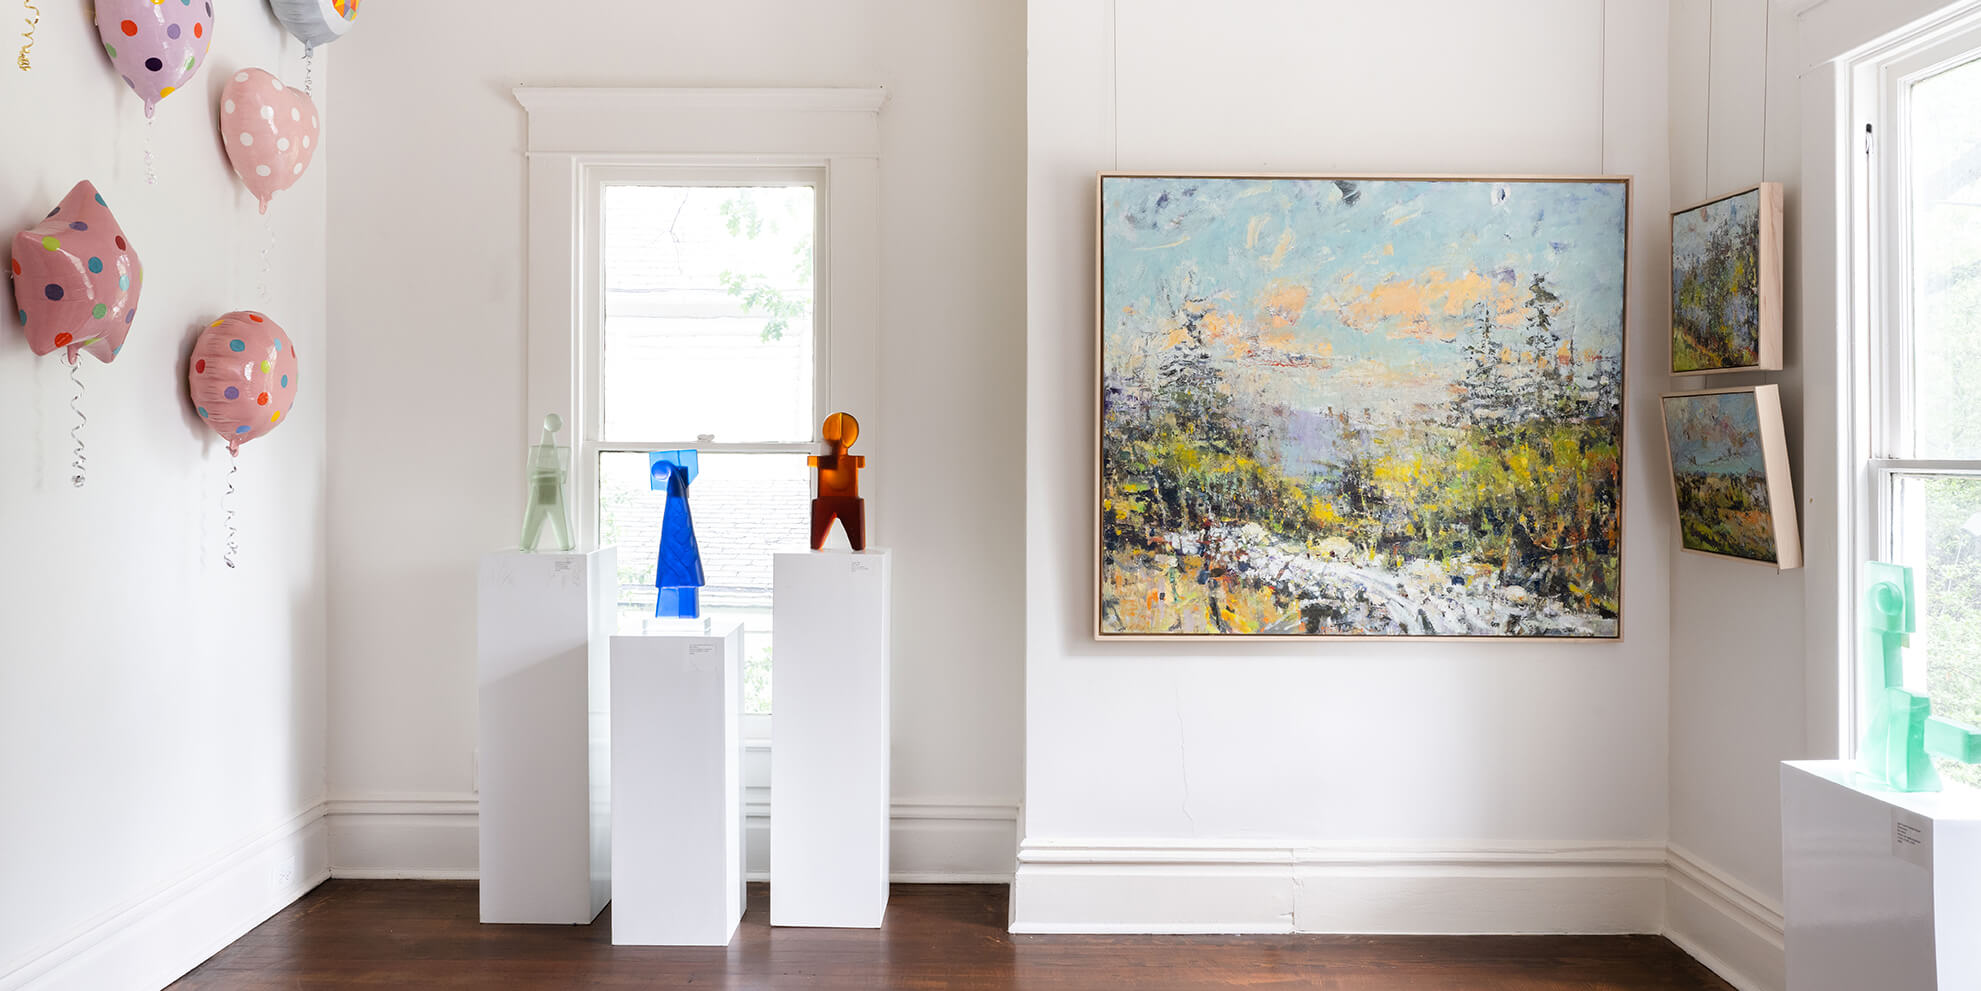 the picture shows a room with white walls, with several pieces of art on each wall. the left wall has ceramic pink balloons covered in multicolored polka dots. the center wall has three white stands holding 3 glass figurines; a light green glass man, and cobalt blue glass woman, and a topaz glass child. next to these three standing figurines is a large landscape canvas painting, with choppy brushstrokes. This piece has a light blue and orange sky, with green and grey trees below and a white water stream at the bottom. the right wall has two small pieces with light blue skies and green forests. next to these pieces, in the foreground, is another glass figurine. it is a mint green woman kicking her leg.